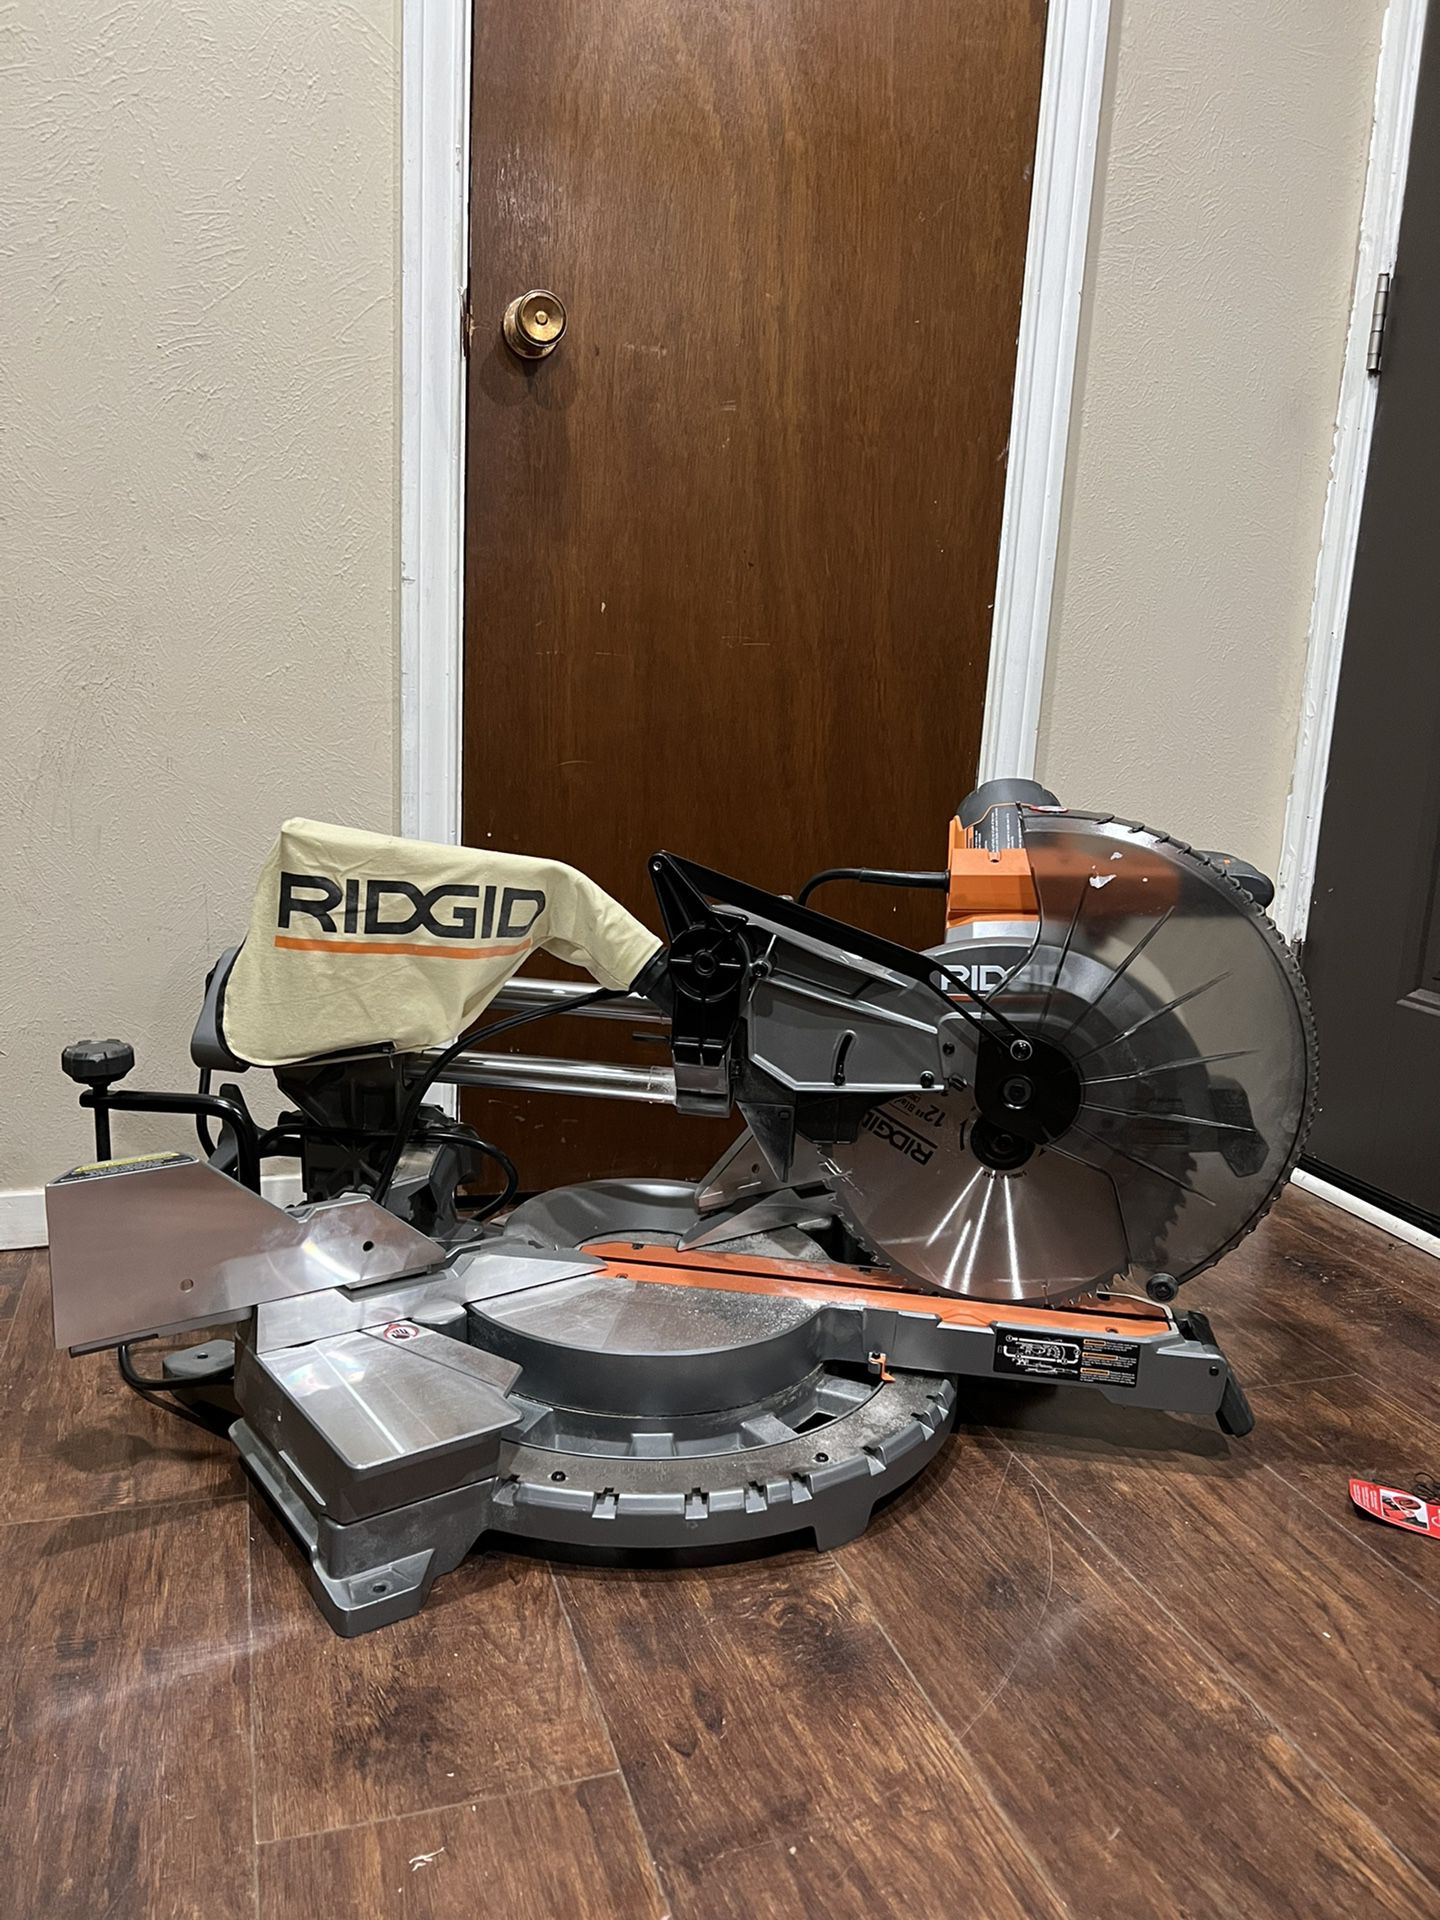 RIDGID 15 Amp Corded 12 in. Dual Bevel Sliding Miter Saw with 70 Deg. Miter  Capacity and LED Cut Line Indicator for Sale in Duncanville, TX OfferUp